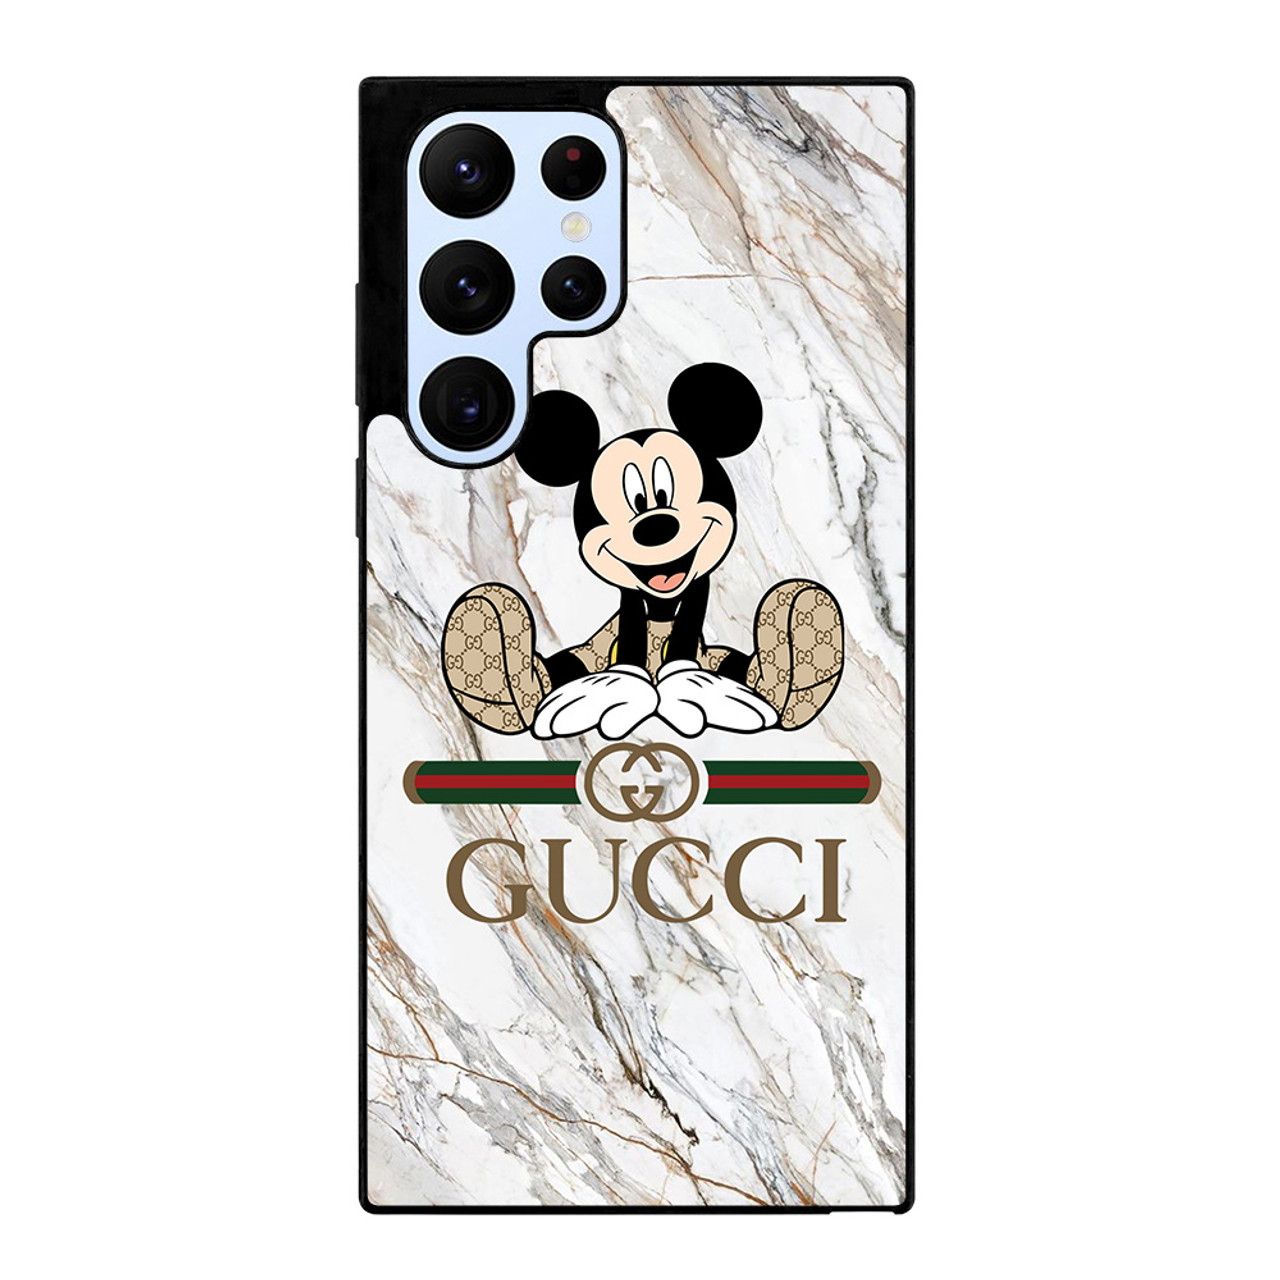 GUCCI MICKEY MOUSE Samsung Galaxy S22 Ultra Case Cover